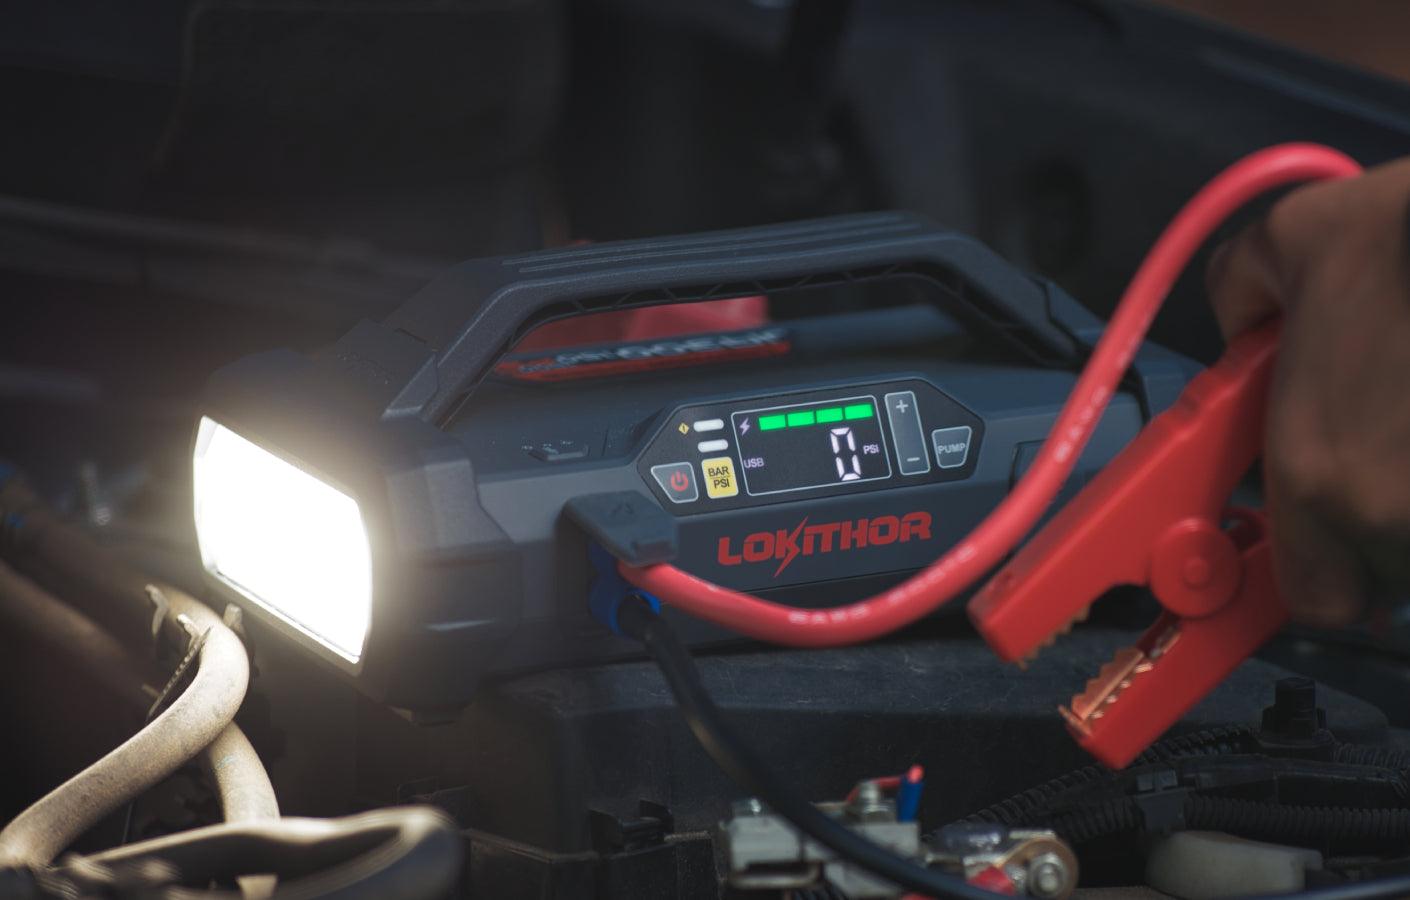 Why LED light is important to a jump starter?